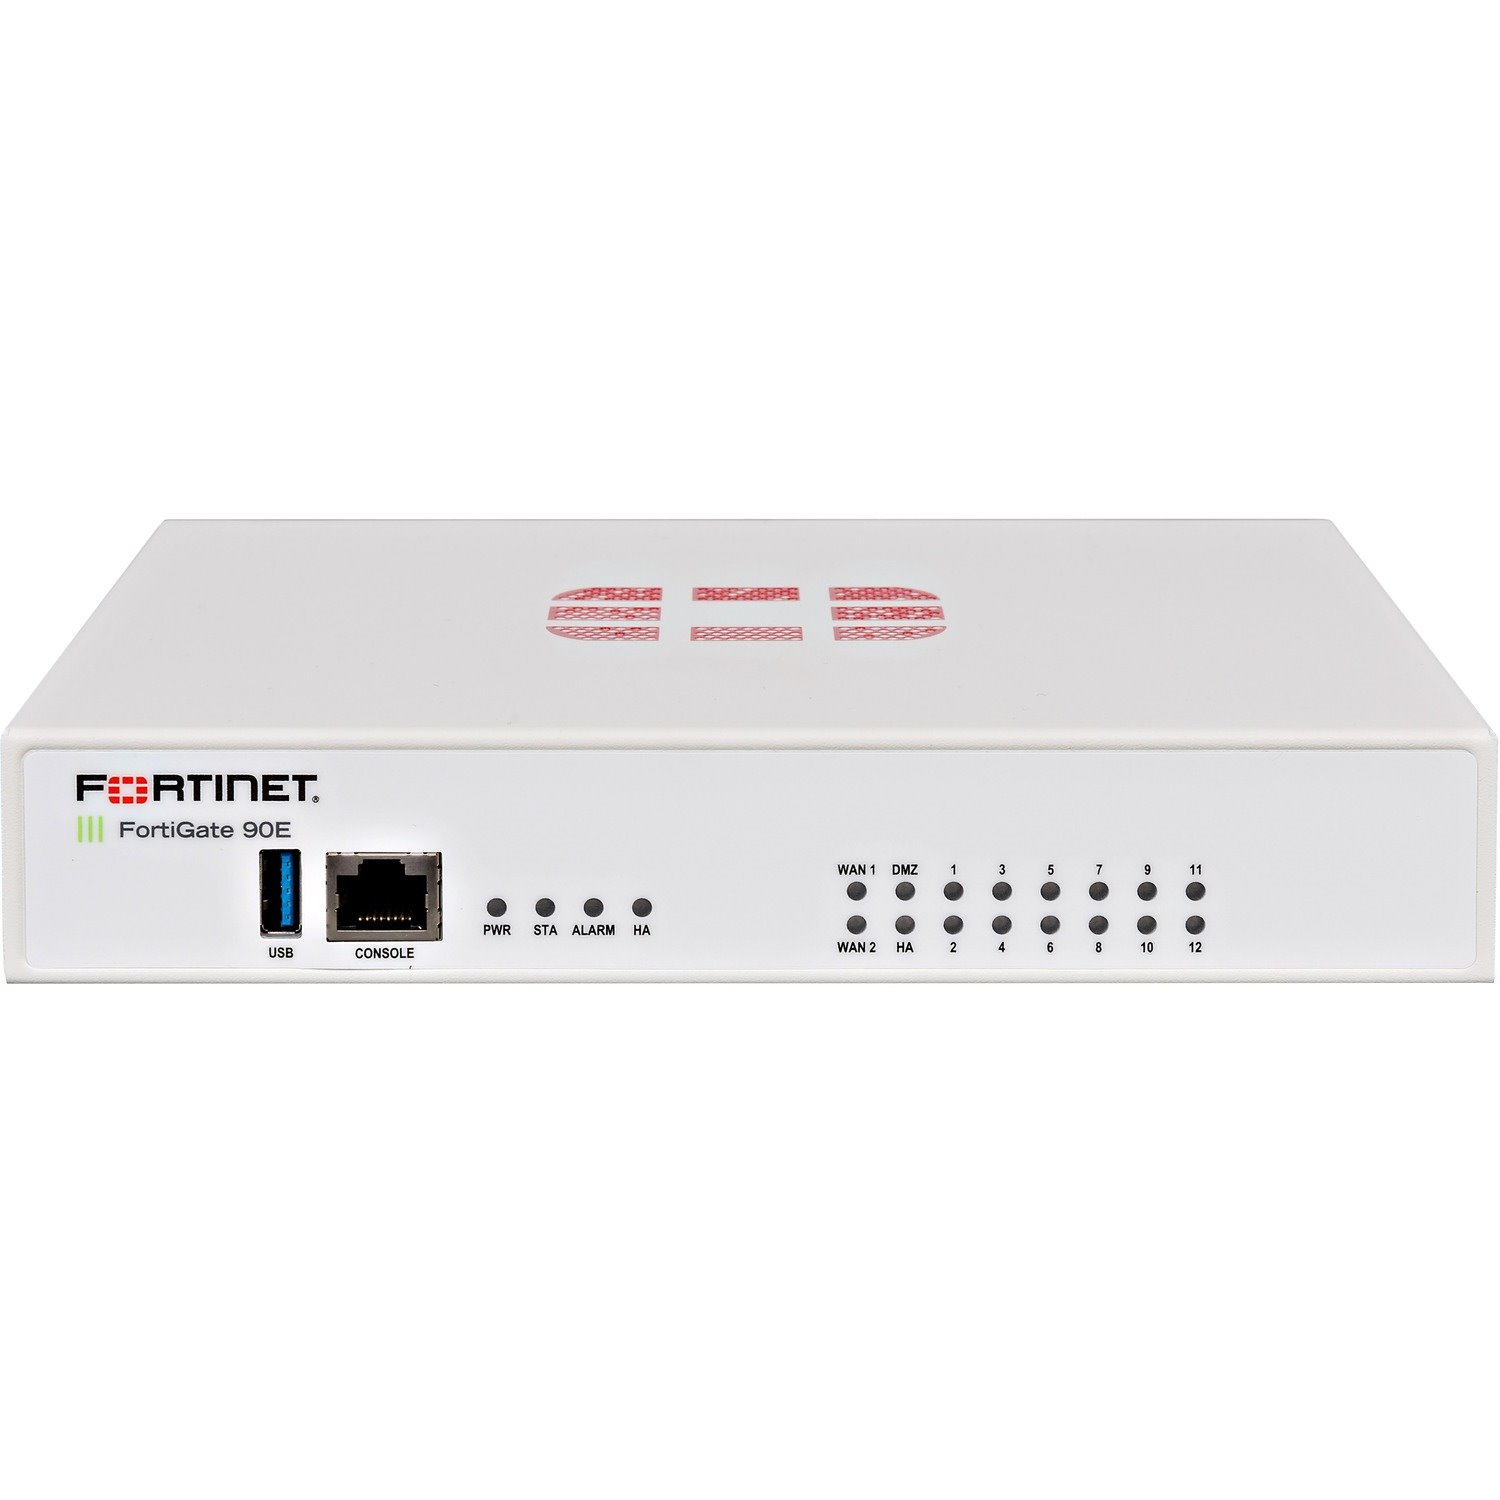 Fortinet FortiGate 90E Network Security/Firewall Appliance